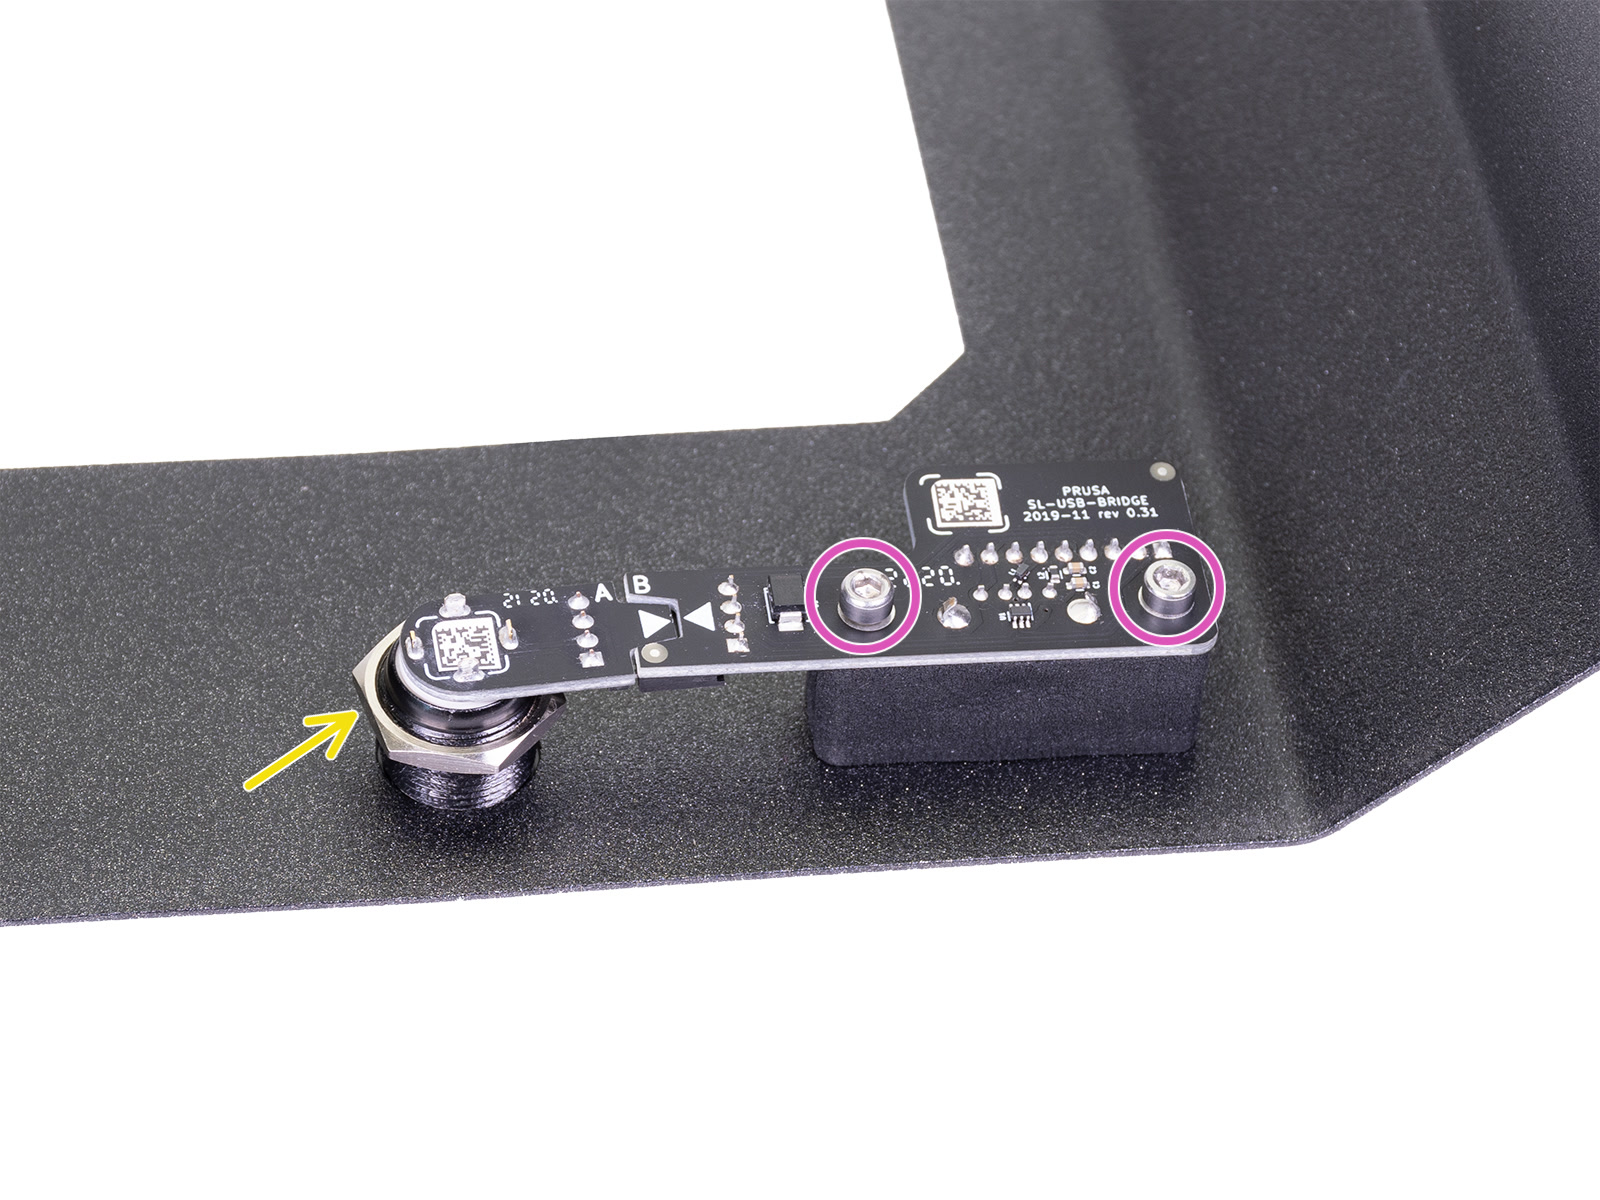 Removing the power button (Version 3.0)